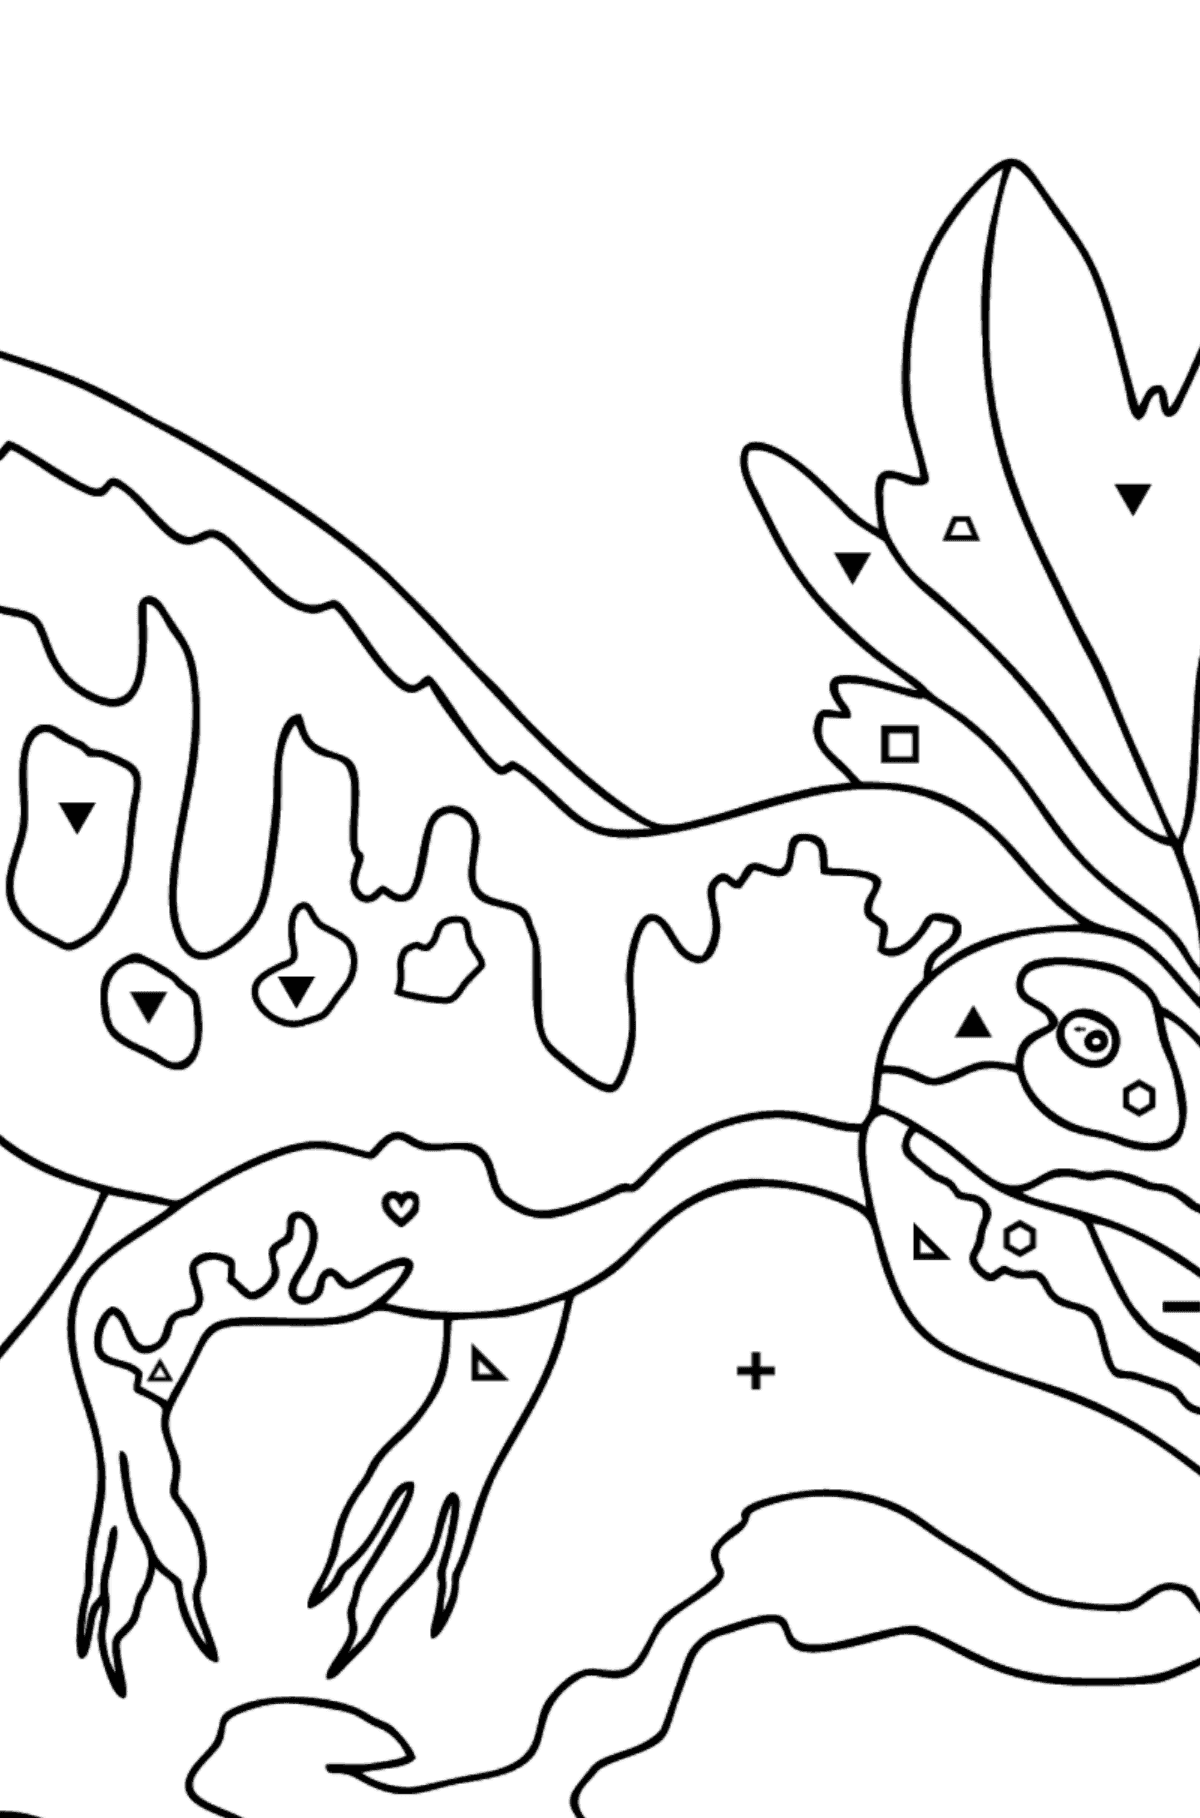 Coloring Page - Allosaurus - A Well-Researched Dinosaur - Coloring by Symbols and Geometric Shapes for Kids